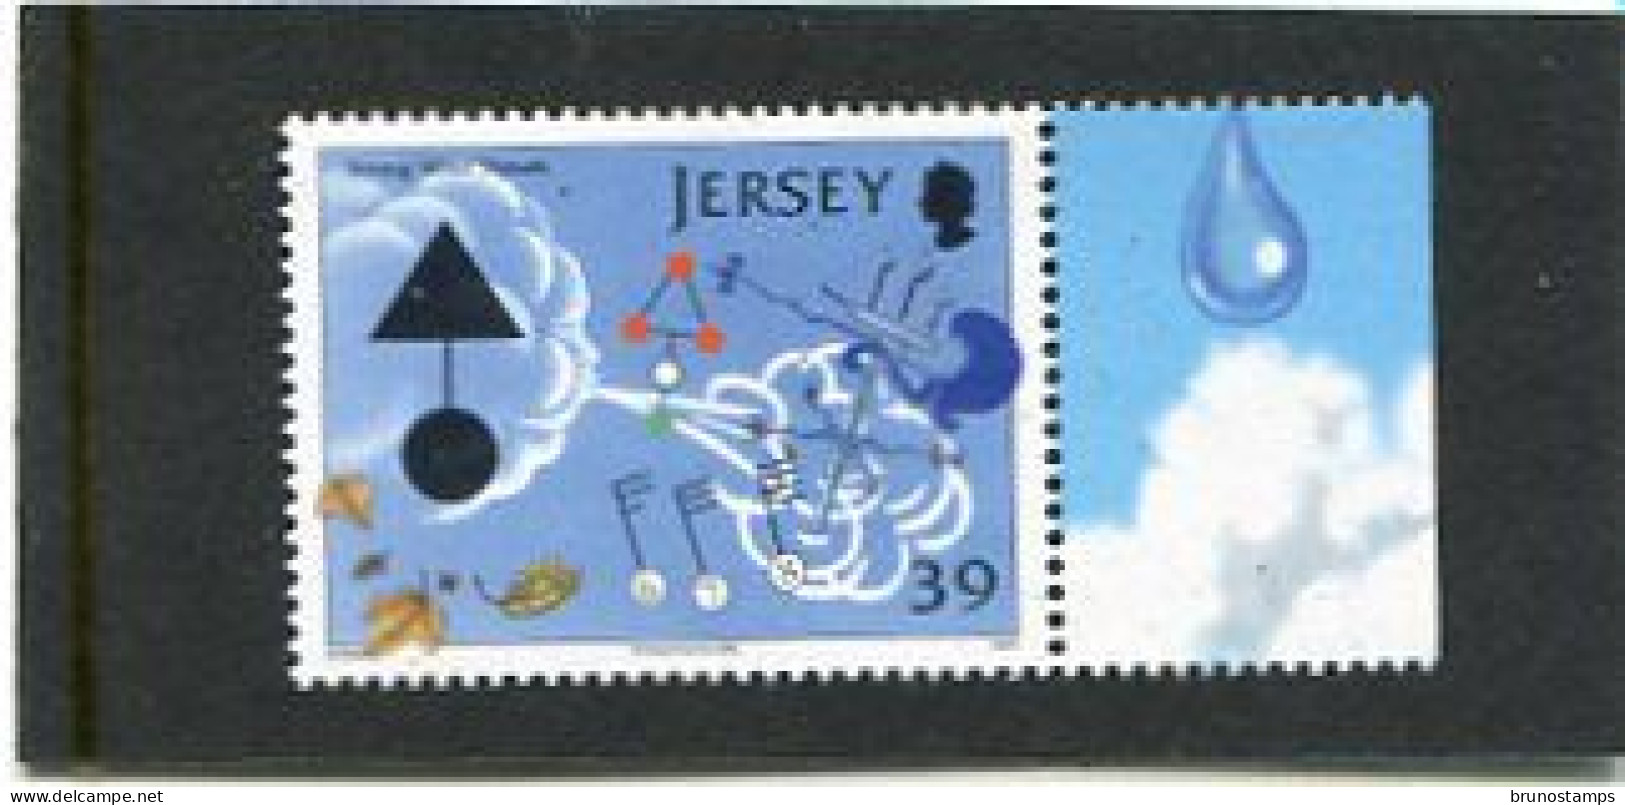 JERSEY - 2008  39p  METEOROLOGICAL SIGNALS  MINT NH - Jersey